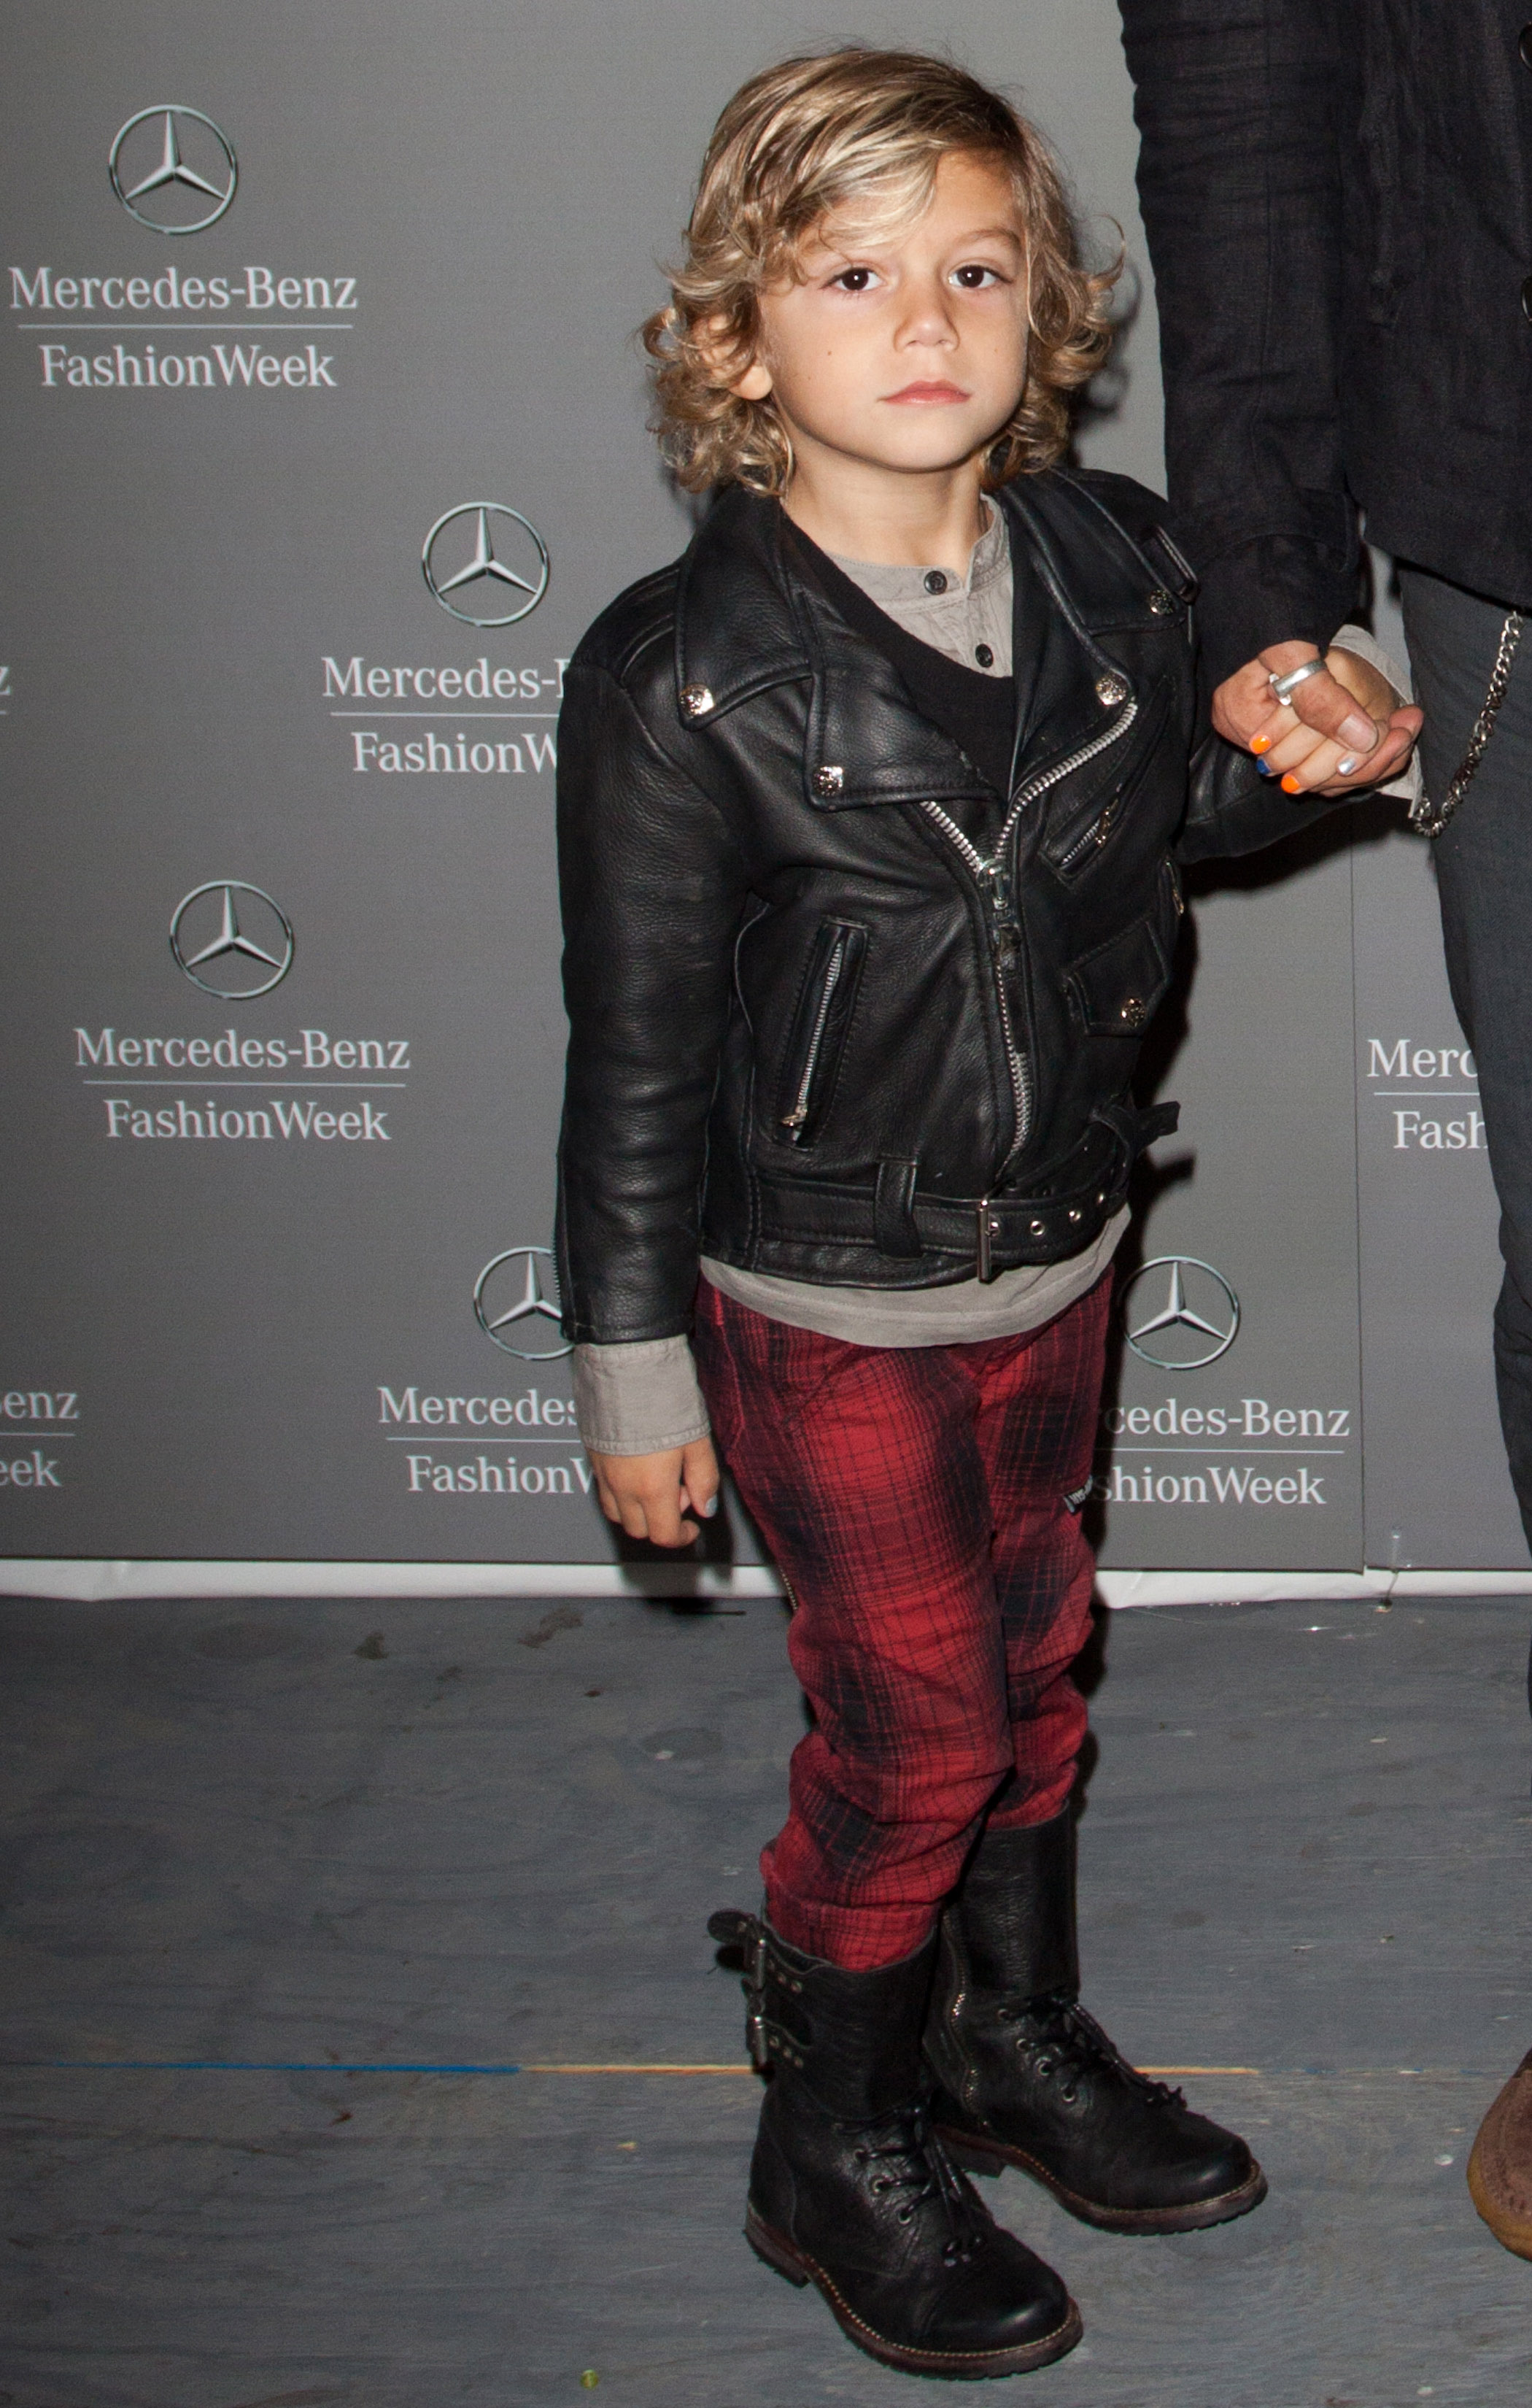 Kingston Rossdale seen during Mercedes-Benz Fashion Week on September 16, 2010 in New York City | Source: Getty Images